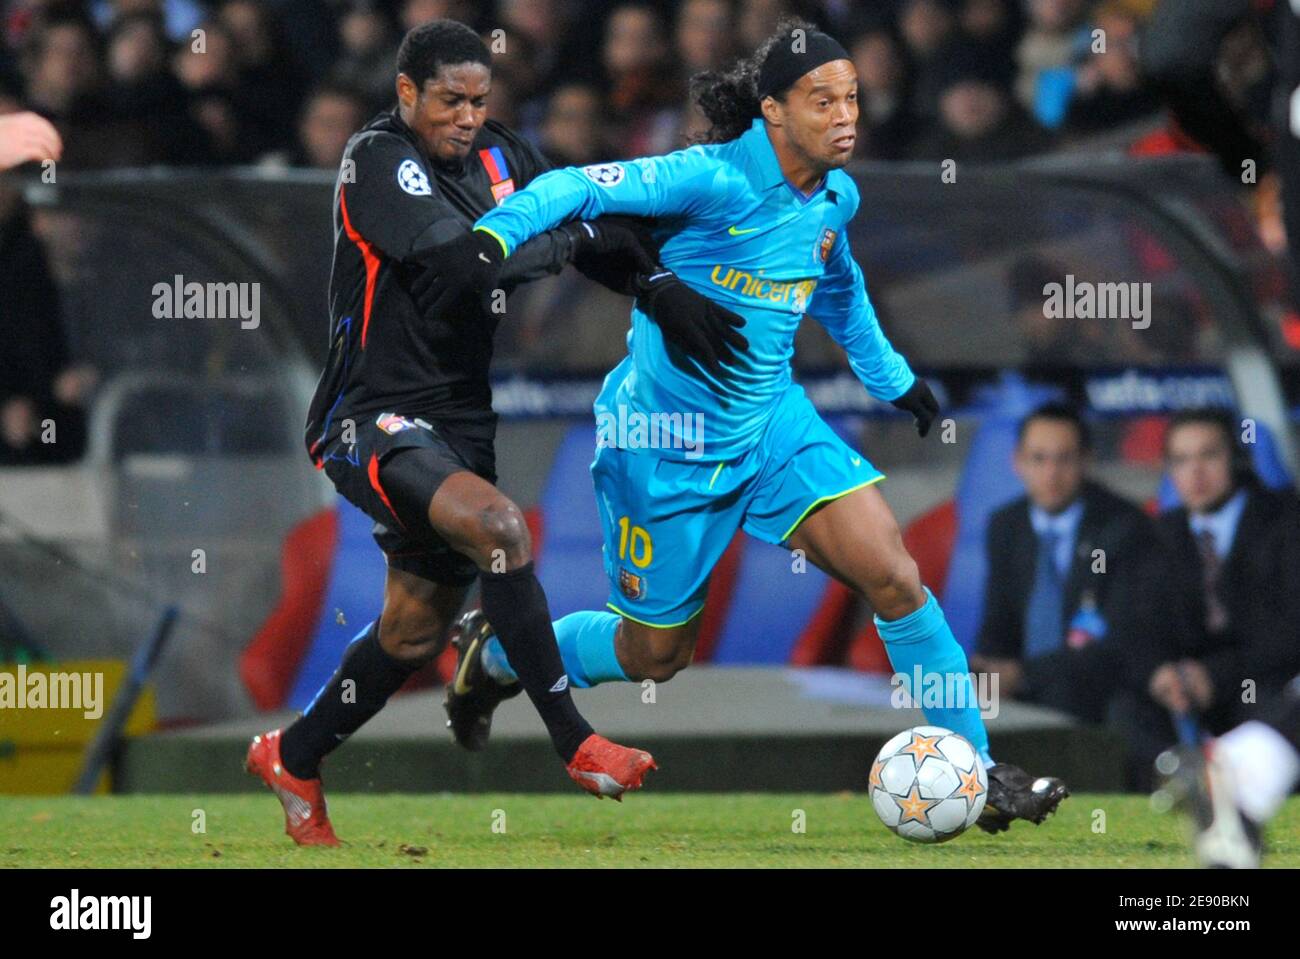 Barcelona's Ronaldinho in action during the UEFA Champions League, Group E,  Olympique Lyonnais vs FC Barcelona at the 'Stade de Gerland' in Lyon,  France, on November 27, 2007. The match ended in